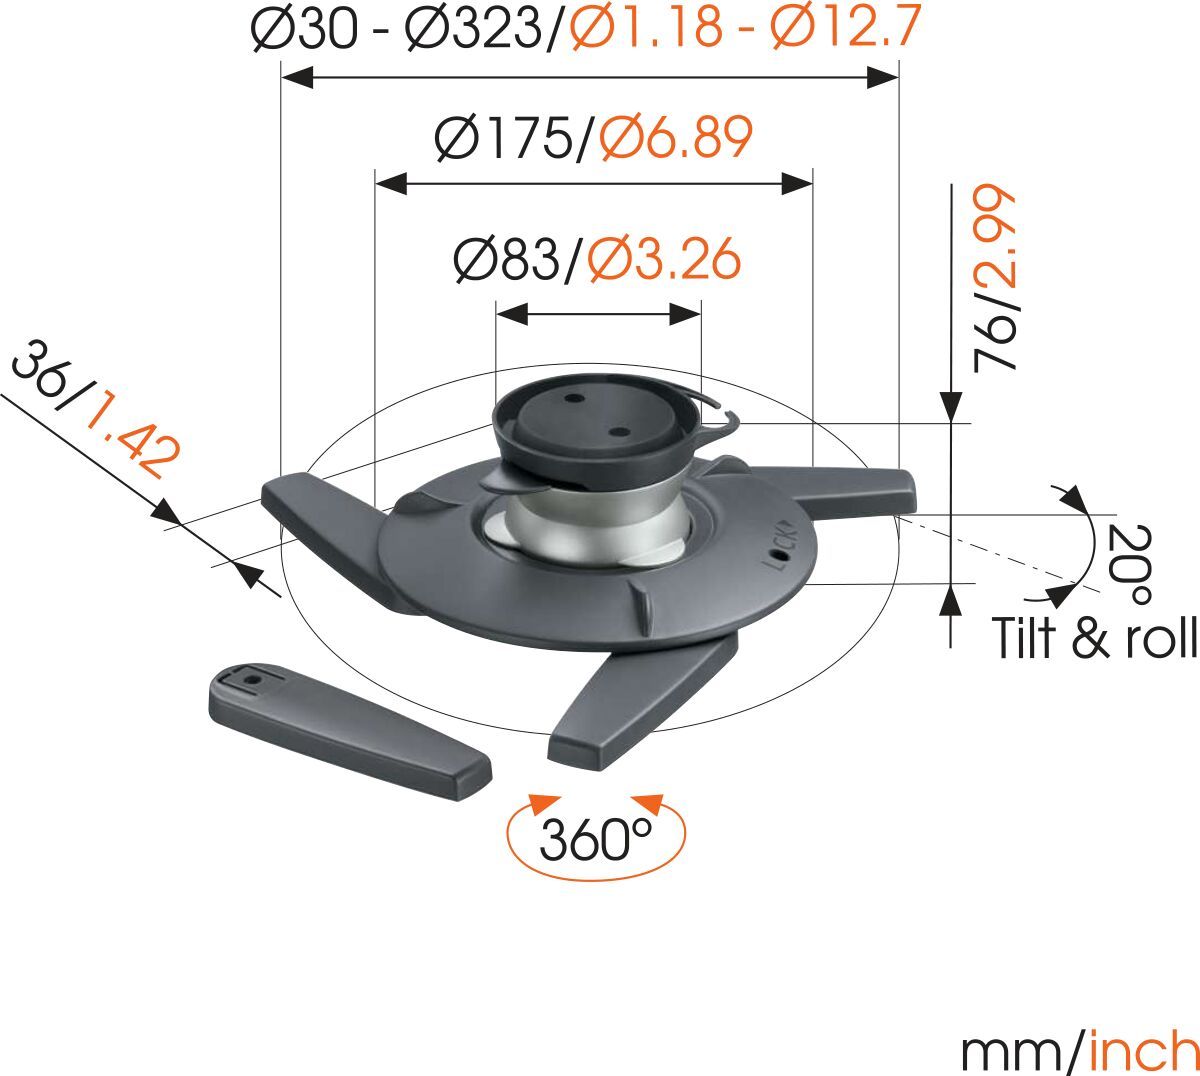 Vogel's EPC 6545 Projector Ceiling Mount - Charge maximale : Dimensions